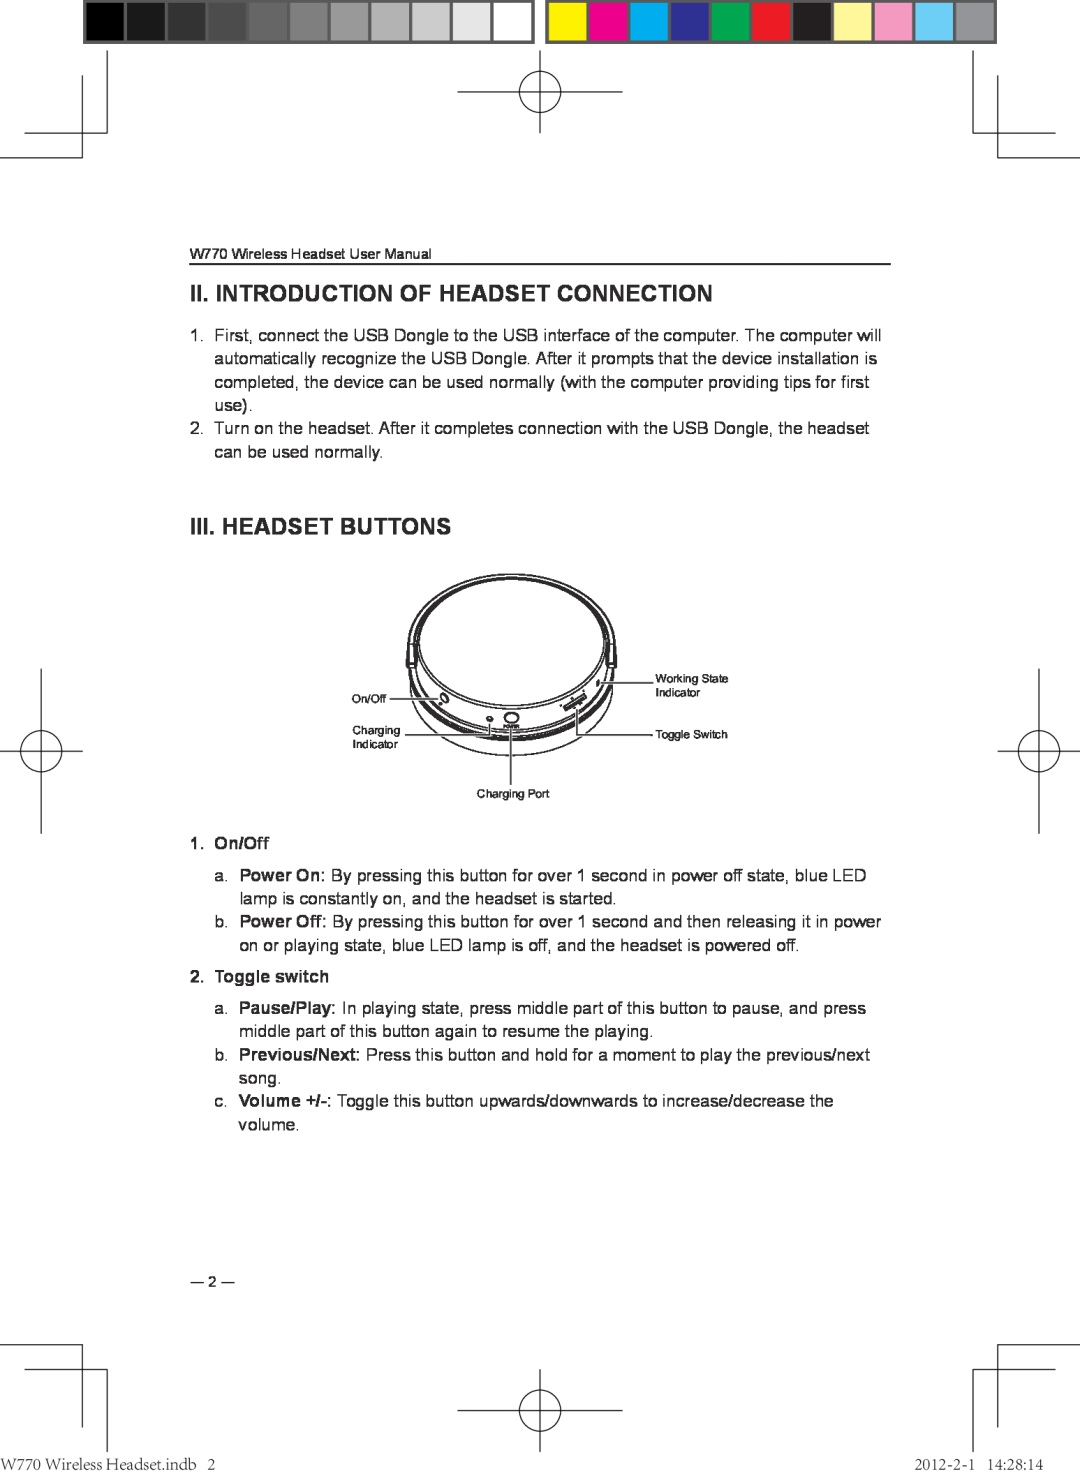 Lenovo W770 user manual II. Introduction of headset connection, III. Headset buttons, 1.On/Off, Toggle switch 